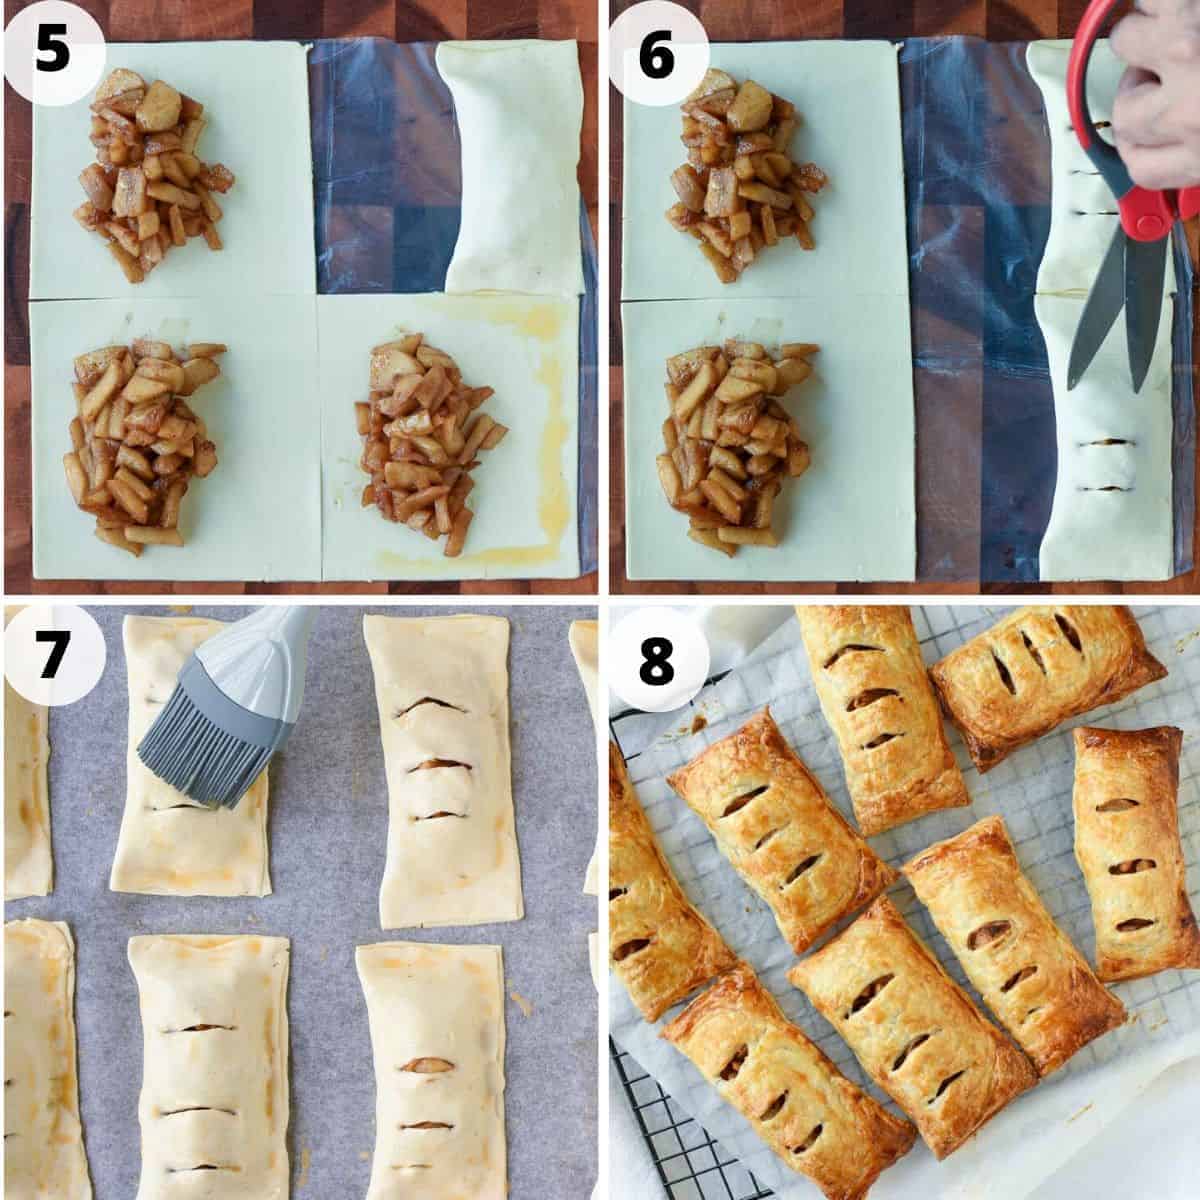 4 images of preparation of this recipe. image 1 is cooked apple on three cut sections of pastry and one sealed pastry, image 2 is scissors cutting slits in the top of pastry, image 3 brushing egg wash on pastry, image 4 baked pastries on black wire rack.